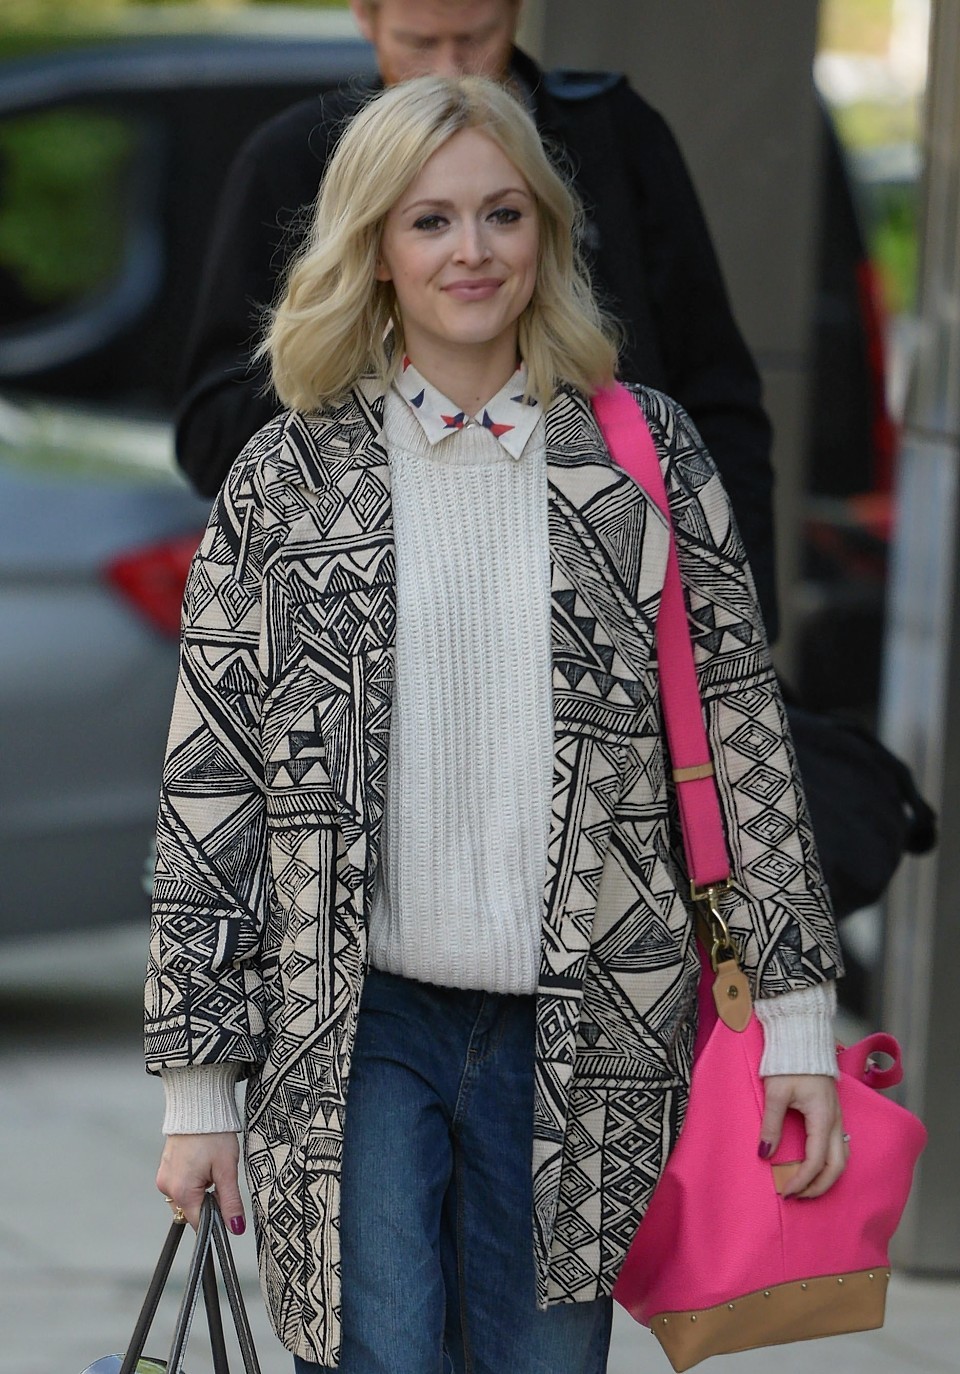 Fearne Cotton will be the voice of a trumpet which appears through the ground